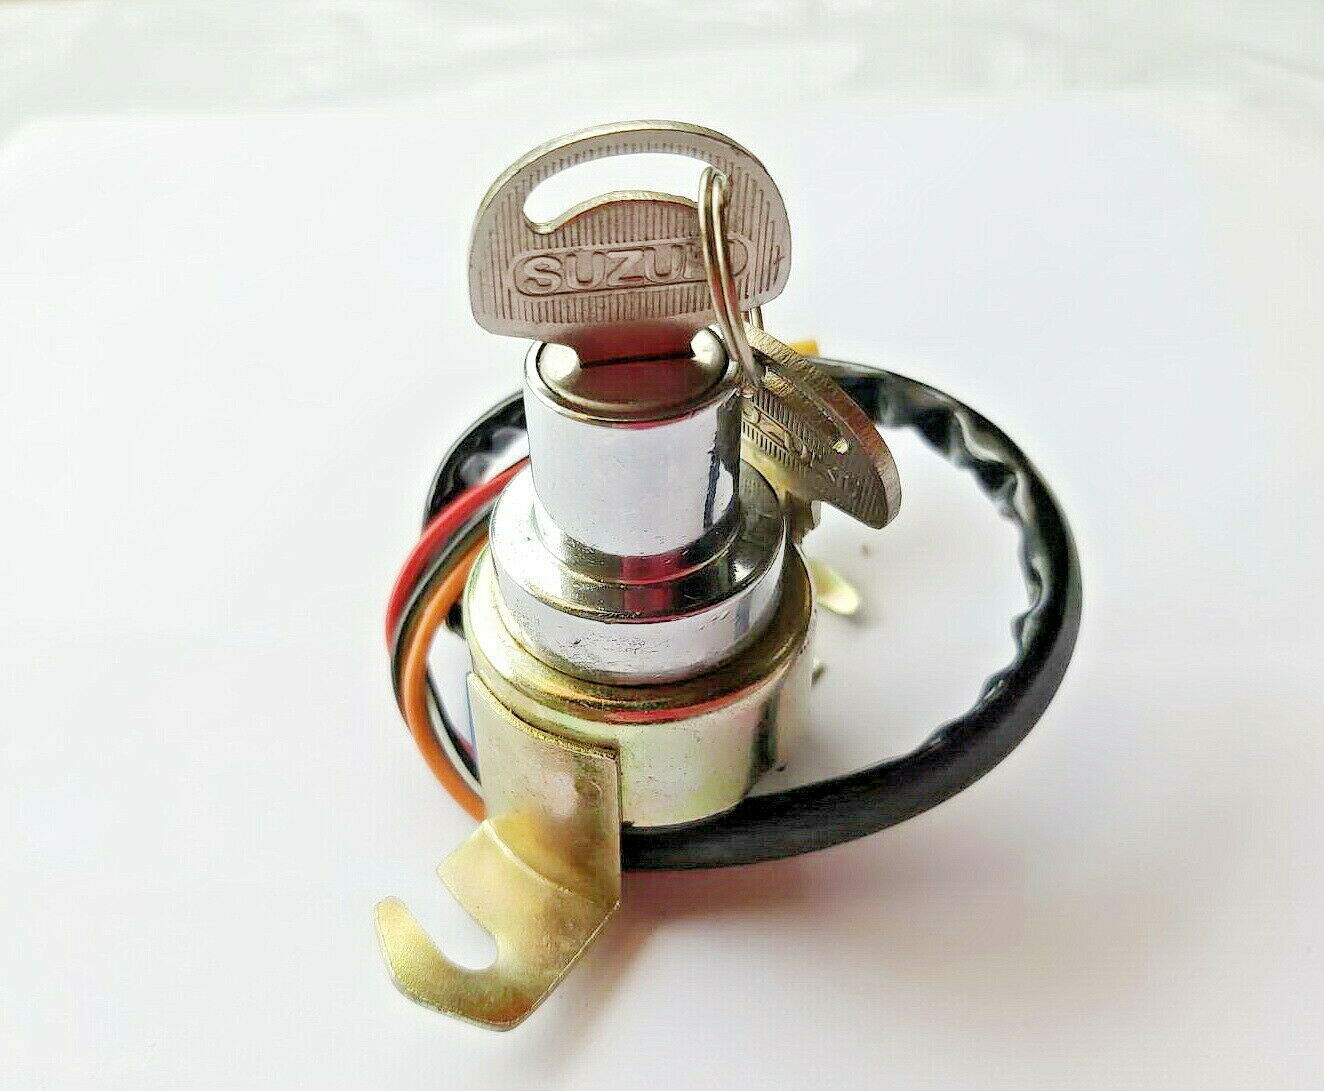 Primary image for Suzuki TS100C TS100N (1978-1979) GP100 Ignition Switch Nos